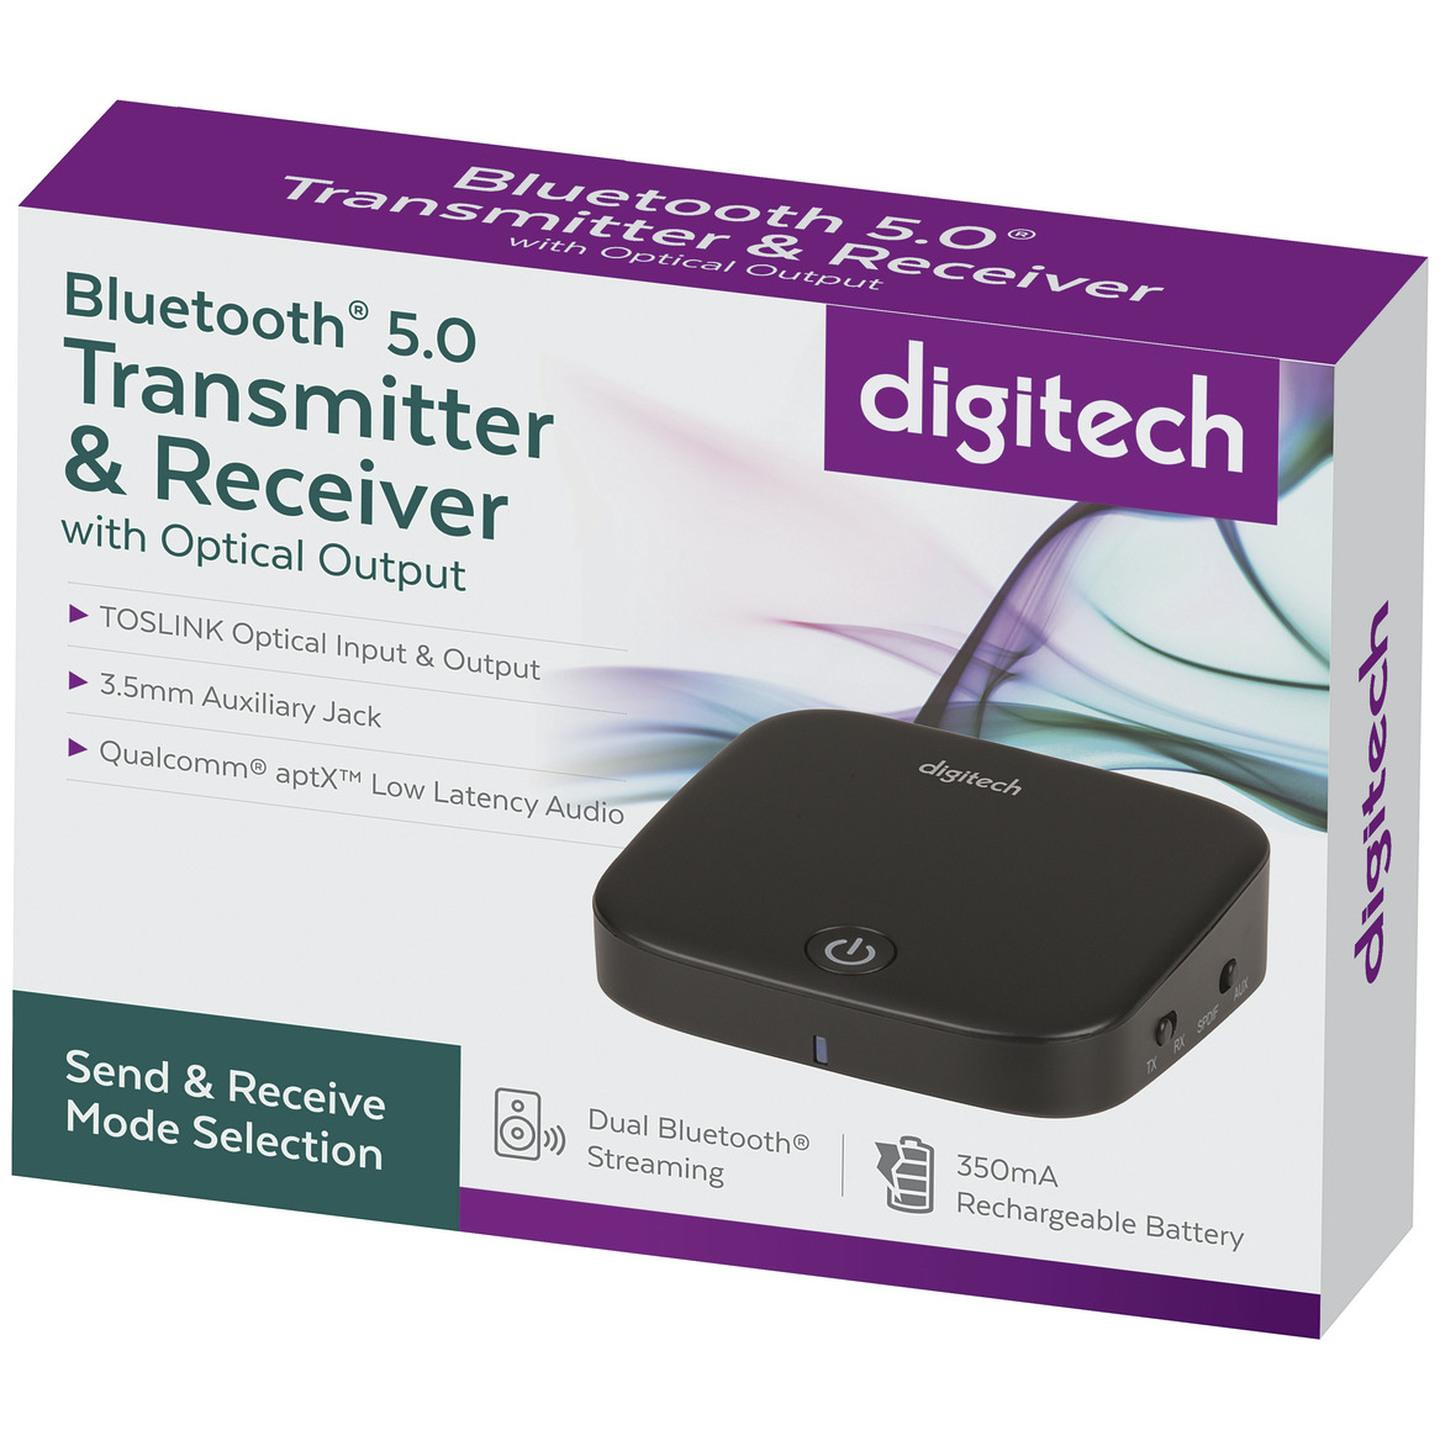 Digitech Bluetooth 5.0 Audio Transmitter and Receiver with Optical Output